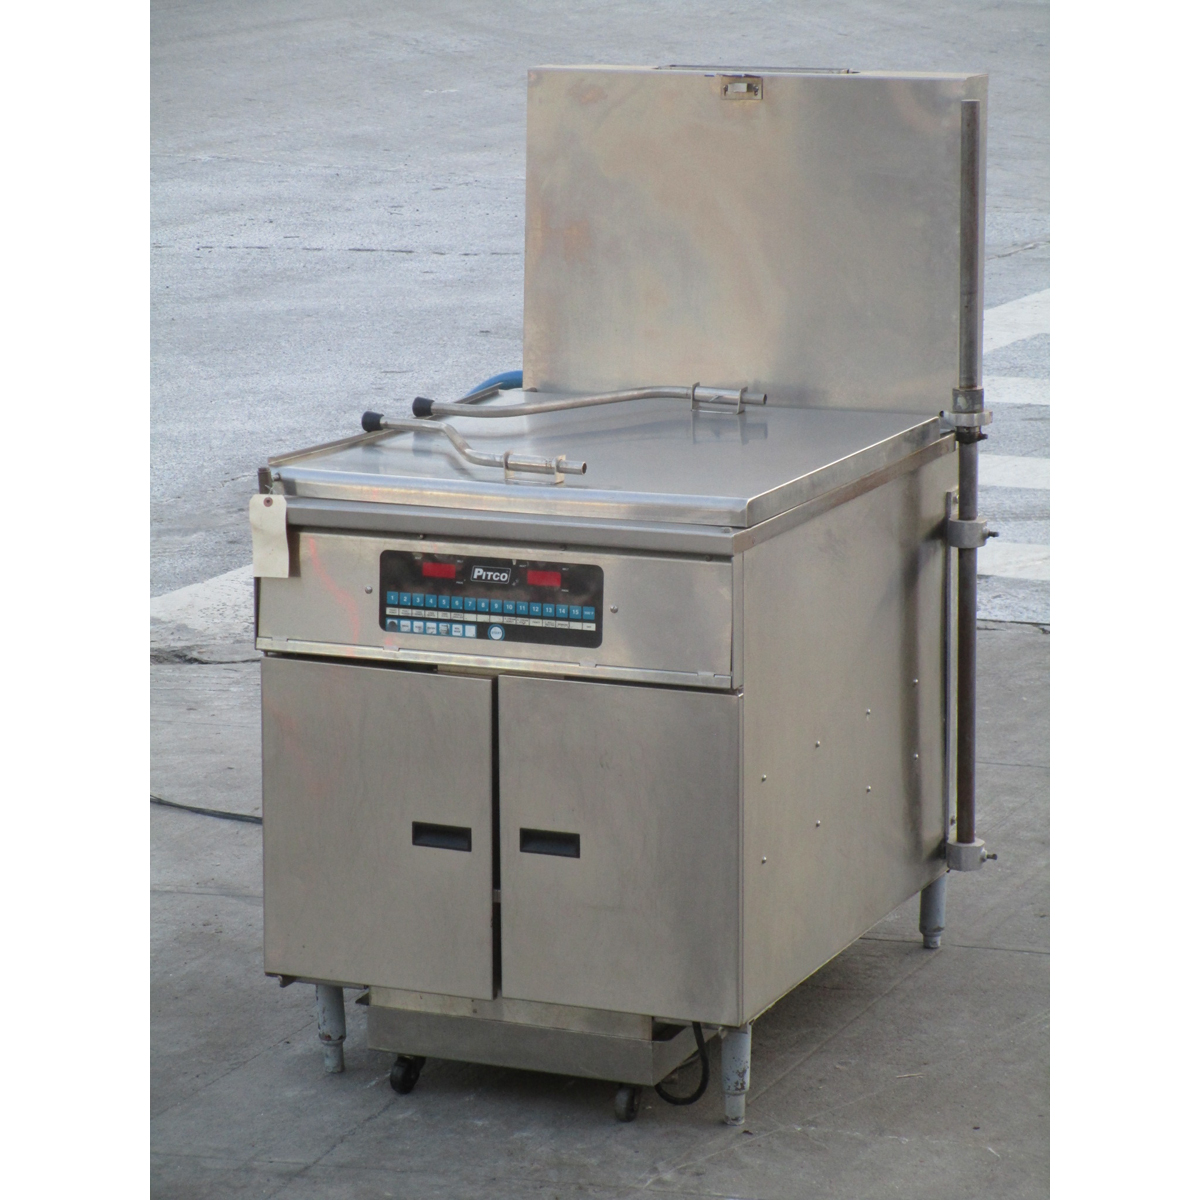 Pitco DD24RUFM Gas Donut Fryer with Filter, Very Good Condition